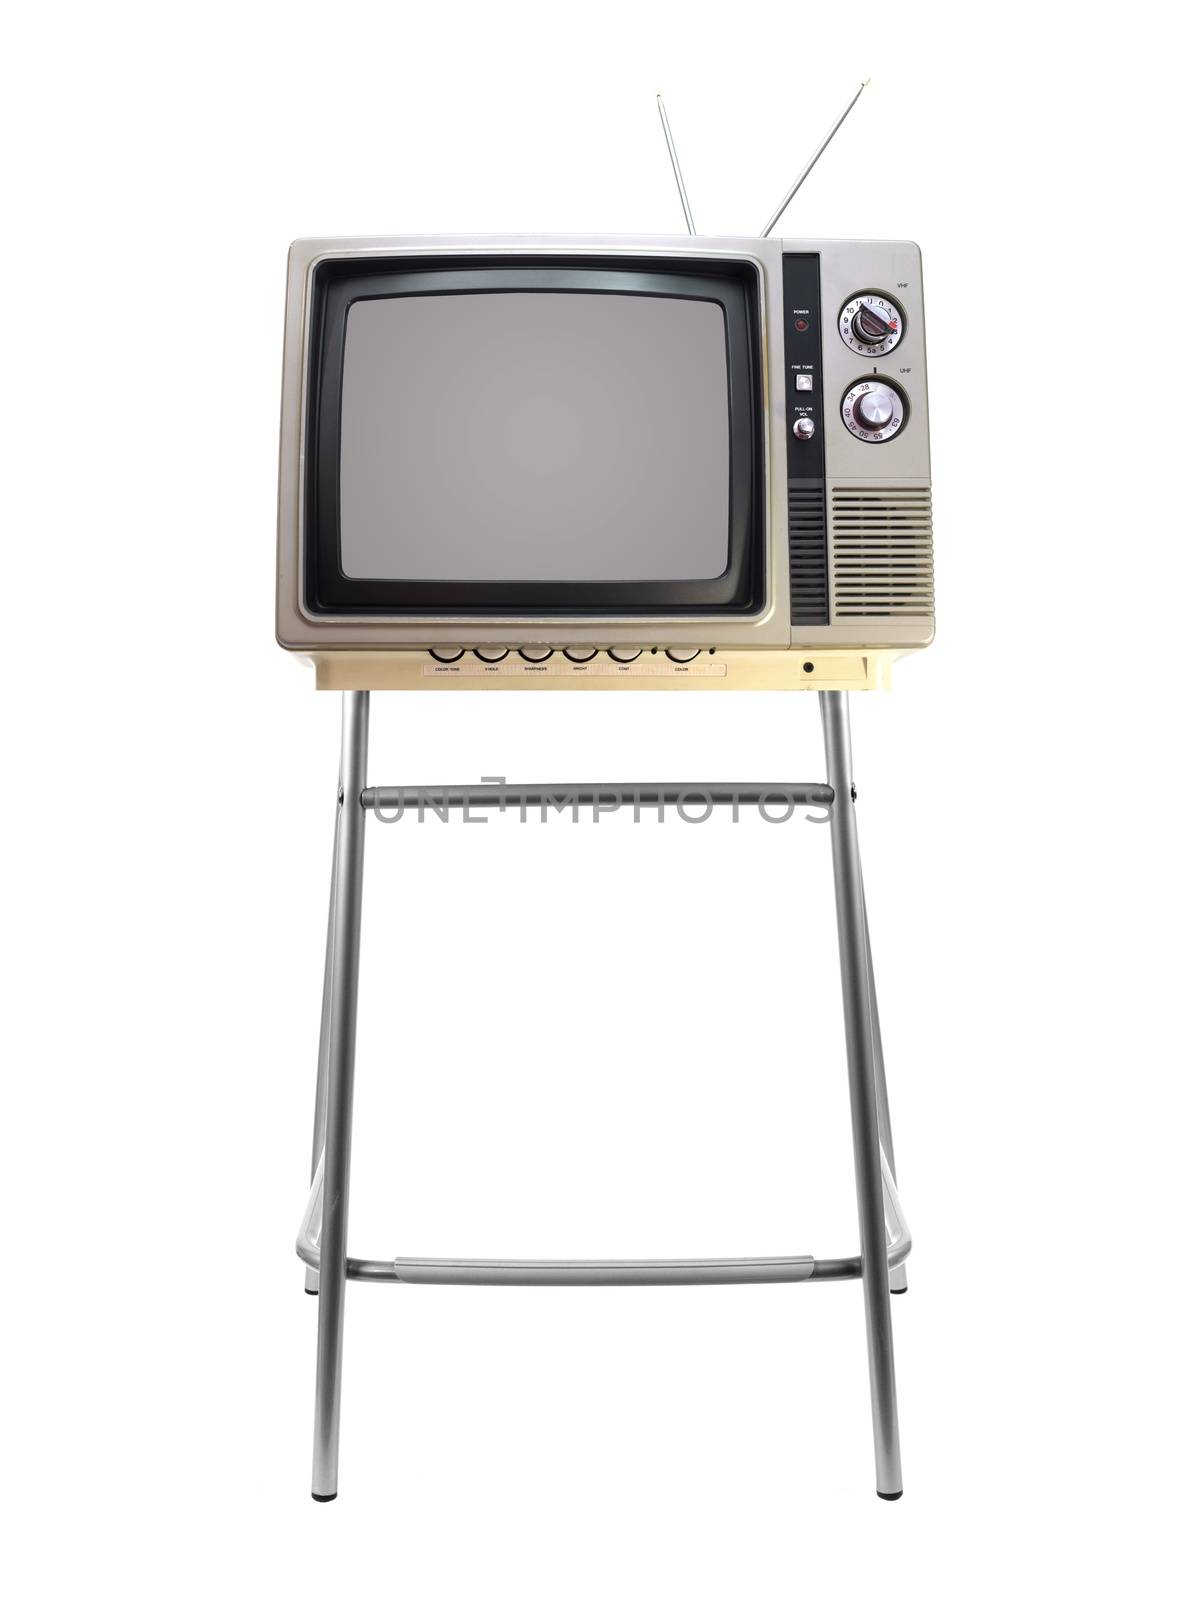 Television by Kitch